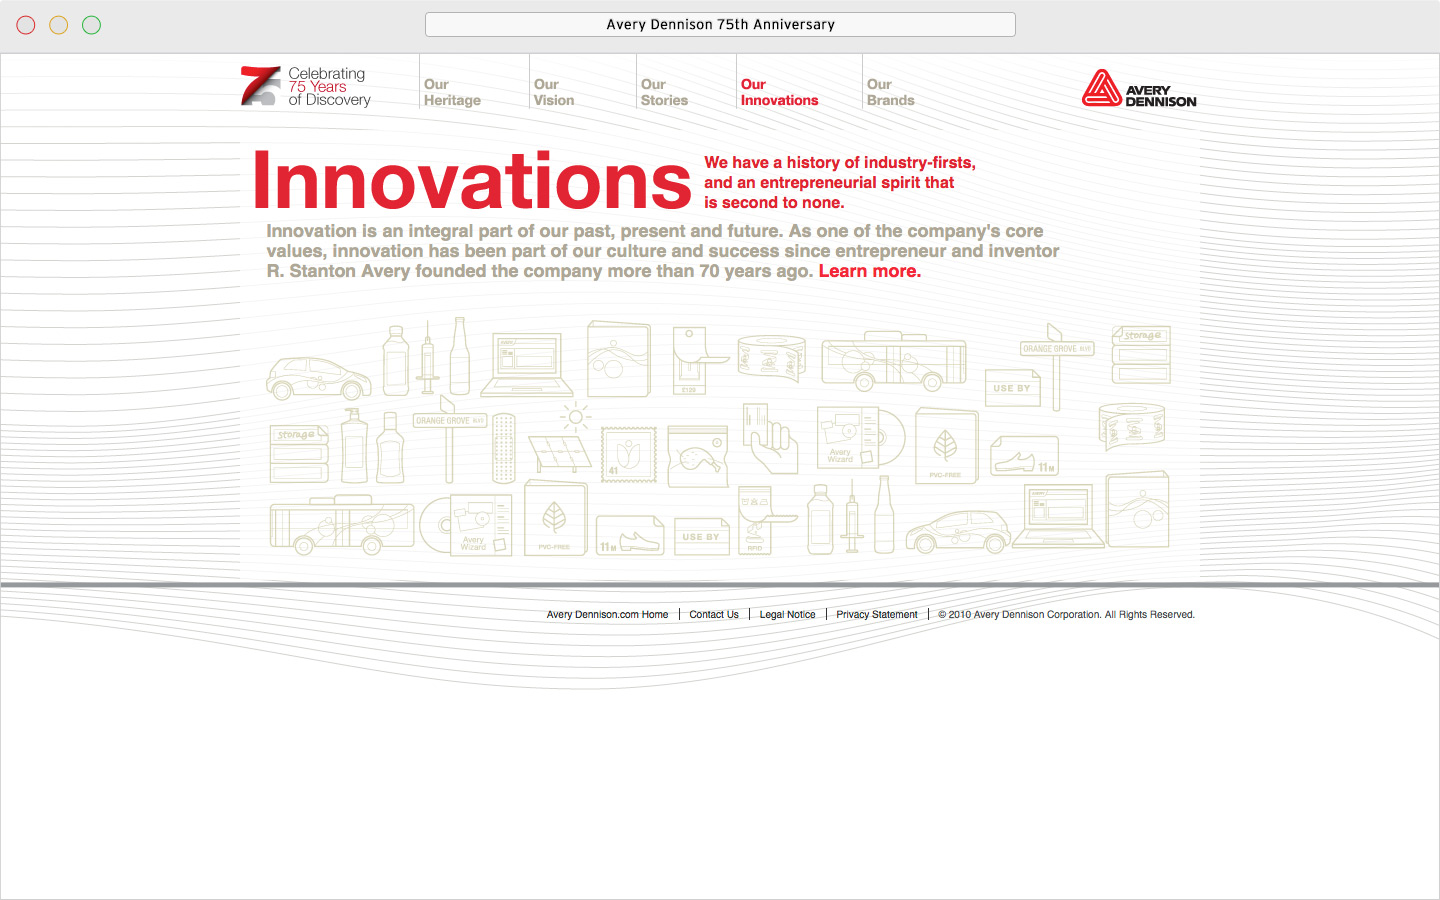 Avery Dennison 75th anniversary microsite Our Innovations